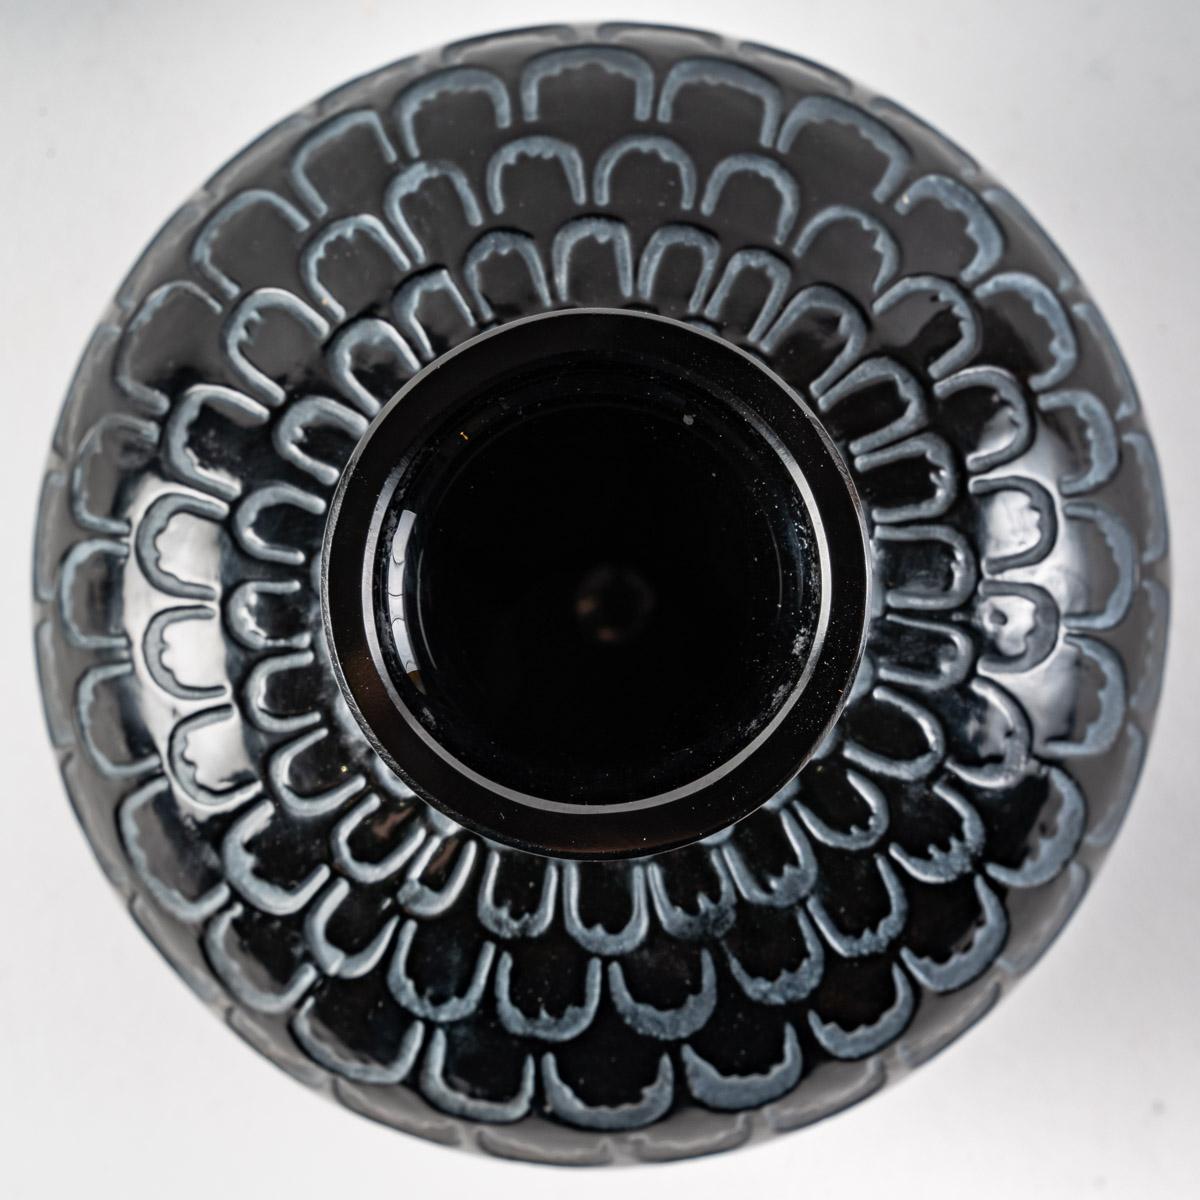 Molded 1930 René Lalique, Vase Grenade Black Glass with White Patina